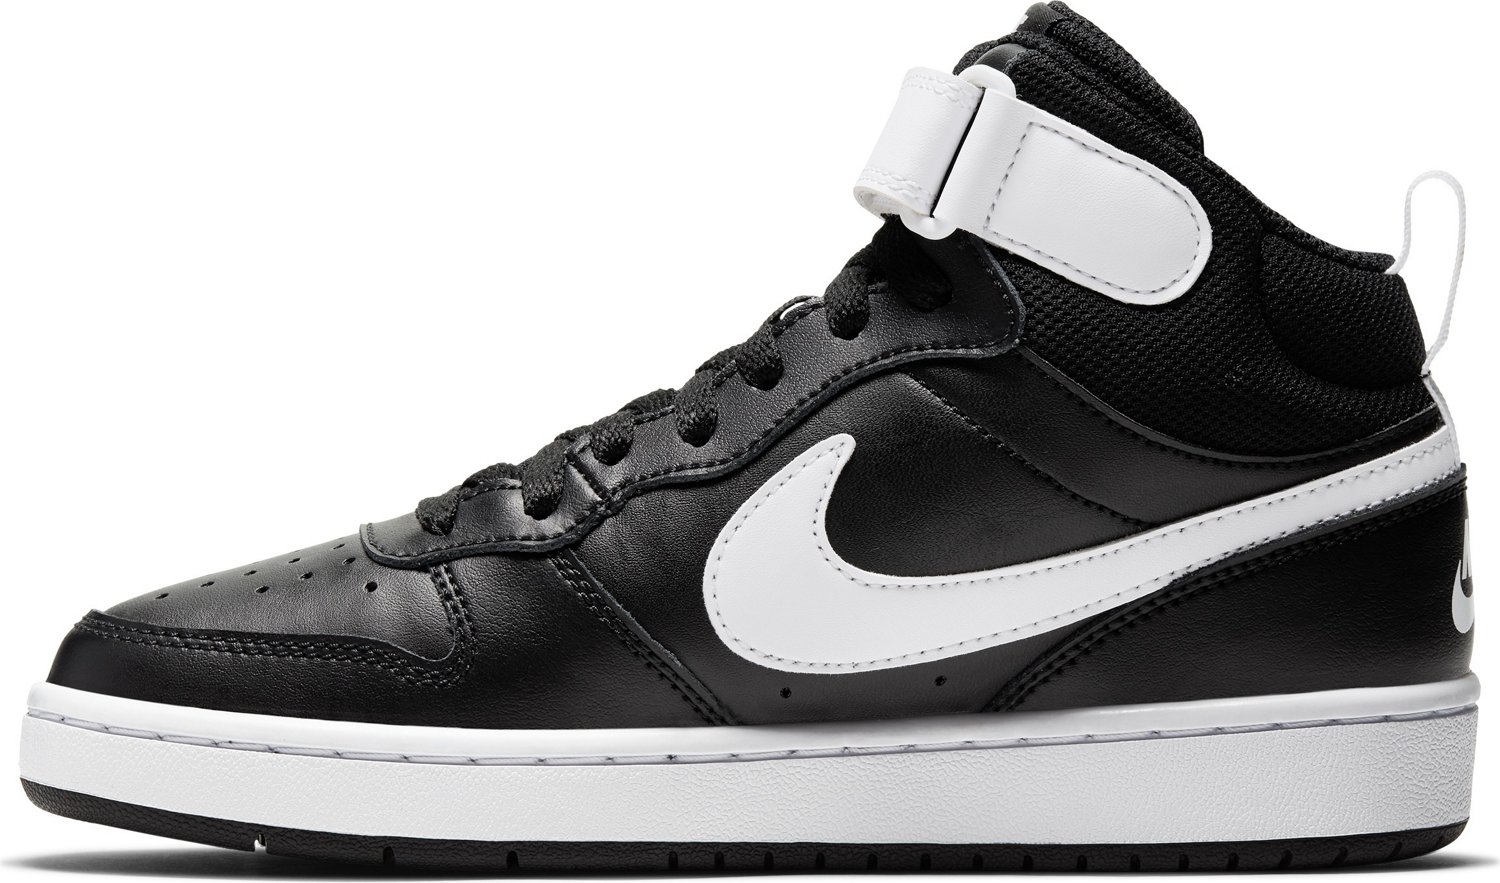 Nike Boys' Court Borough Mid 2 Shoes | Free Shipping at Academy